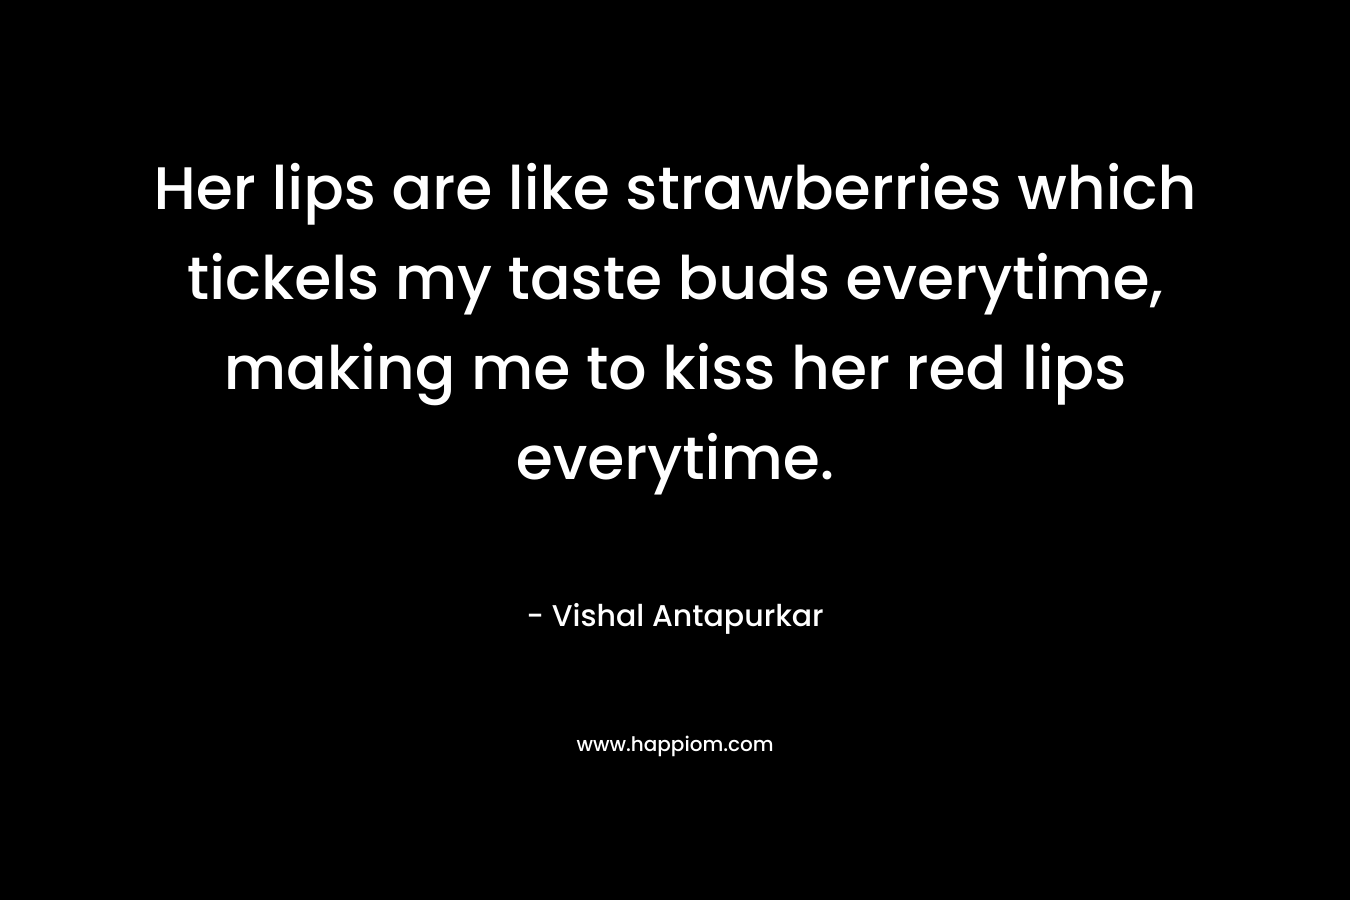 Her lips are like strawberries which tickels my taste buds everytime, making me to kiss her red lips everytime.